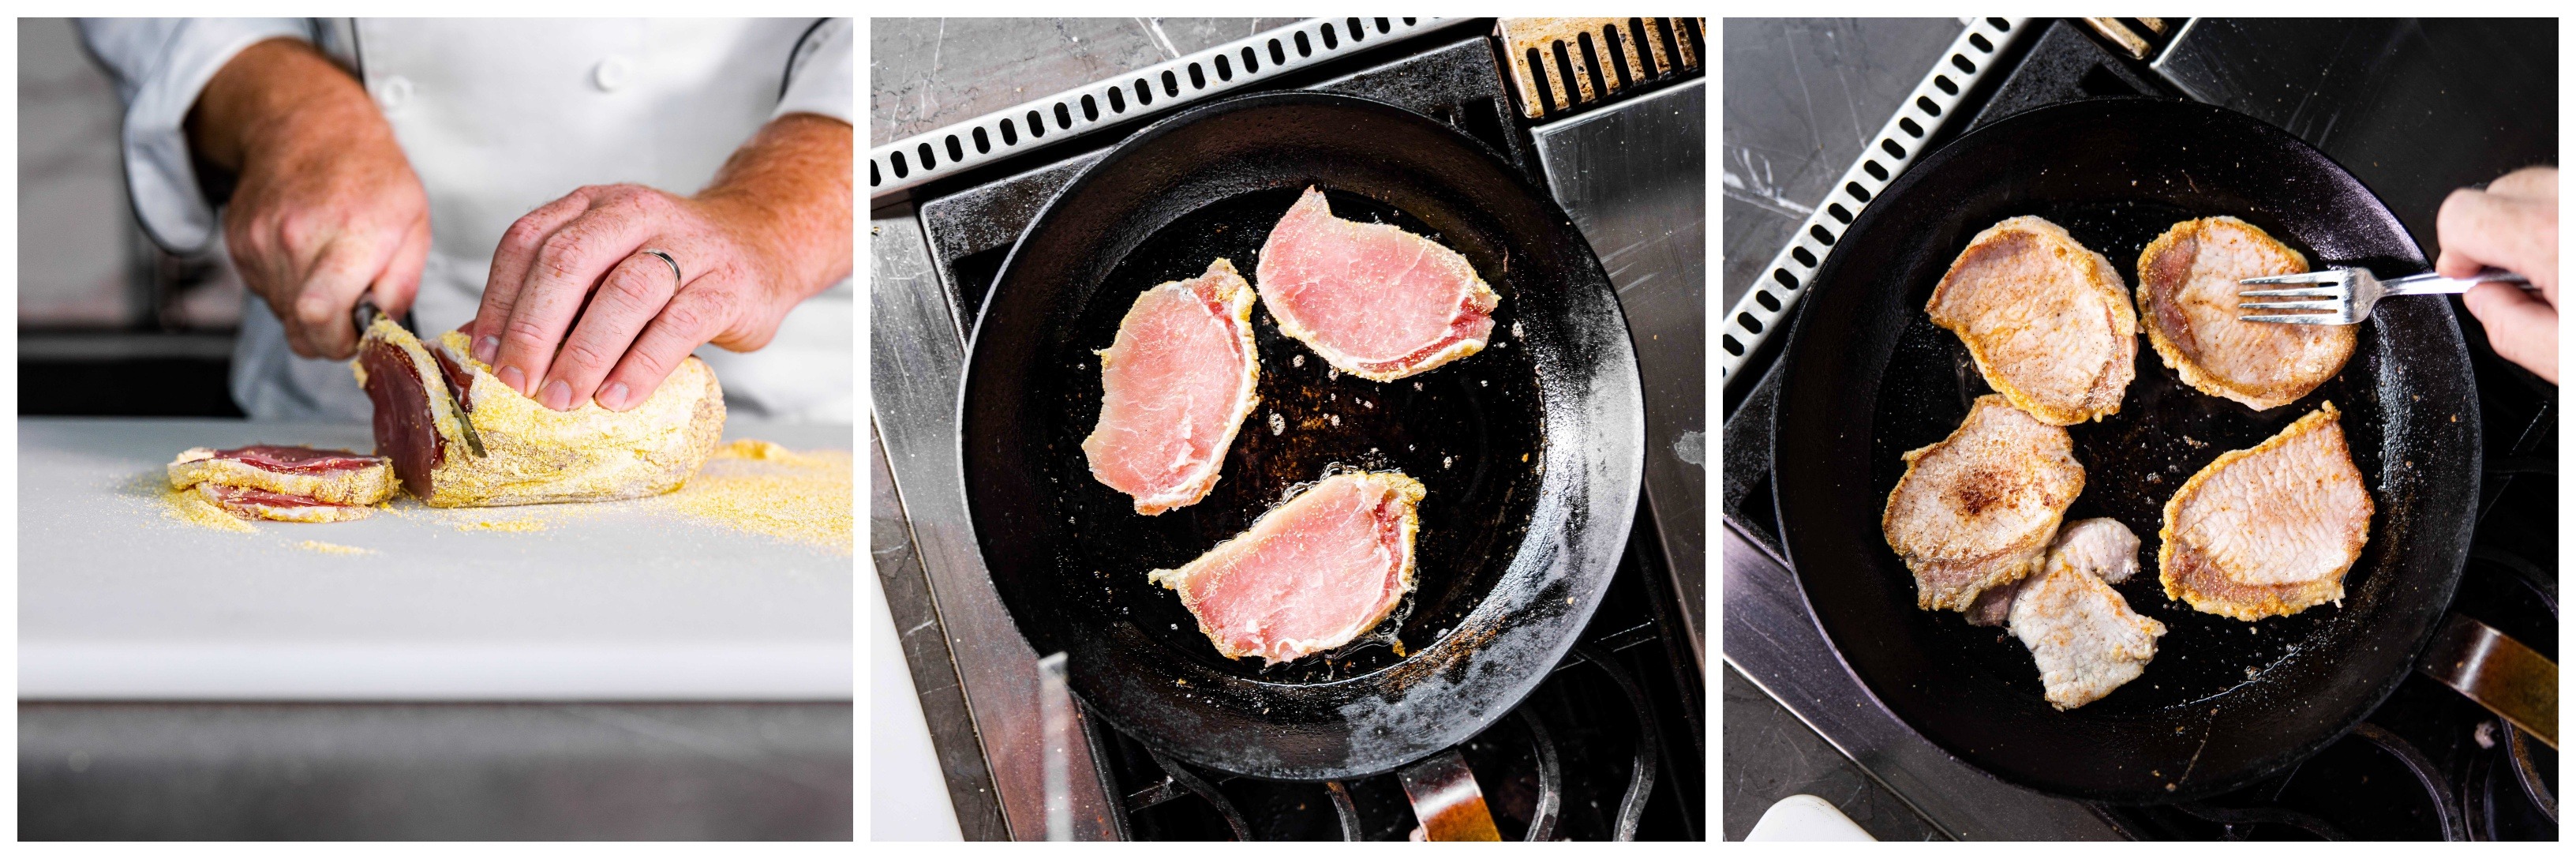 Slice and cook the peameal bacon